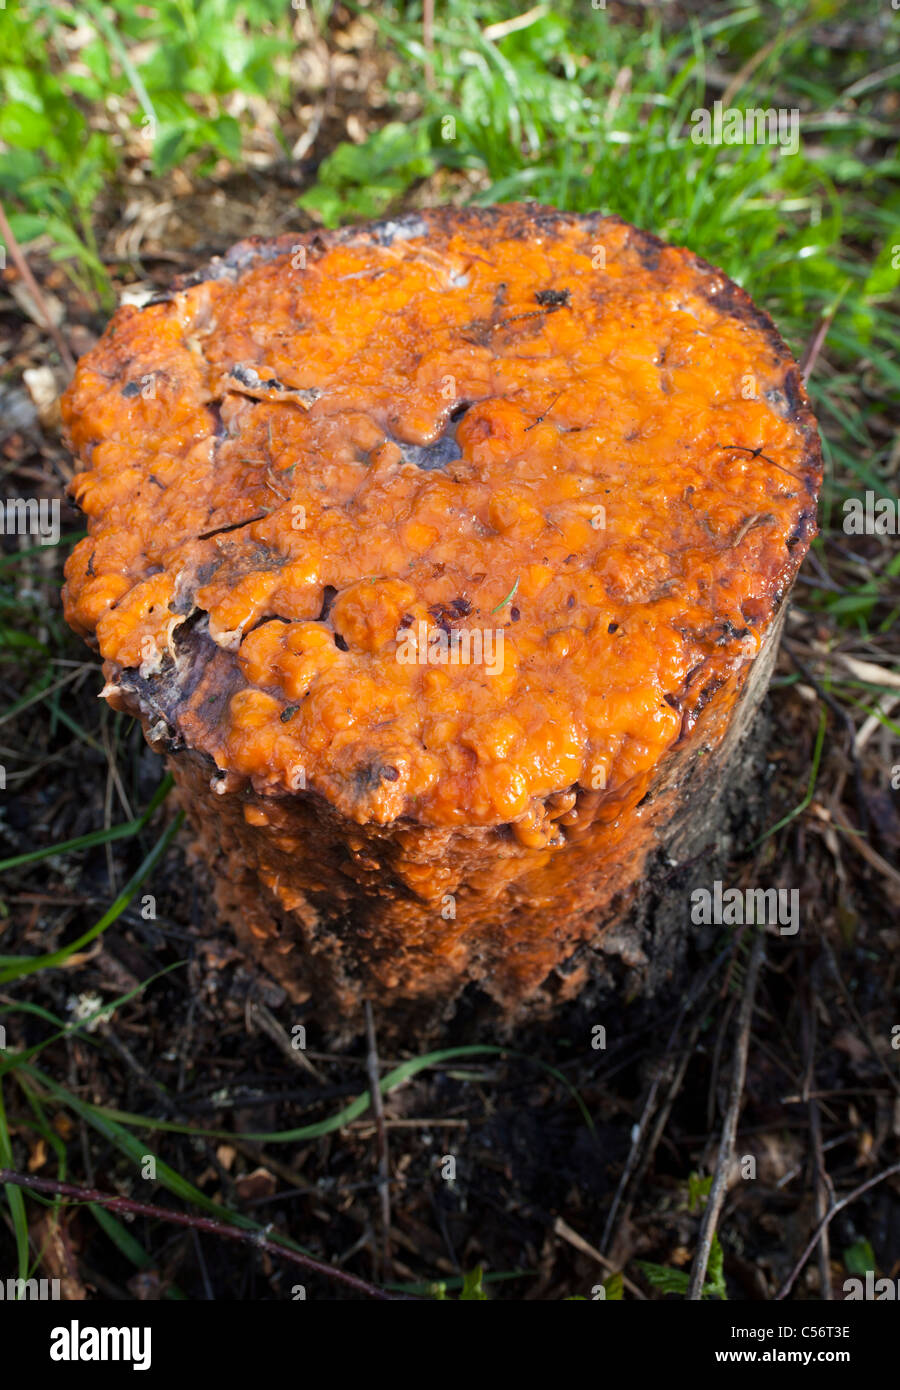 Partially coagulated sap extracting from a cut birch ( betula ) tree stump Stock Photo